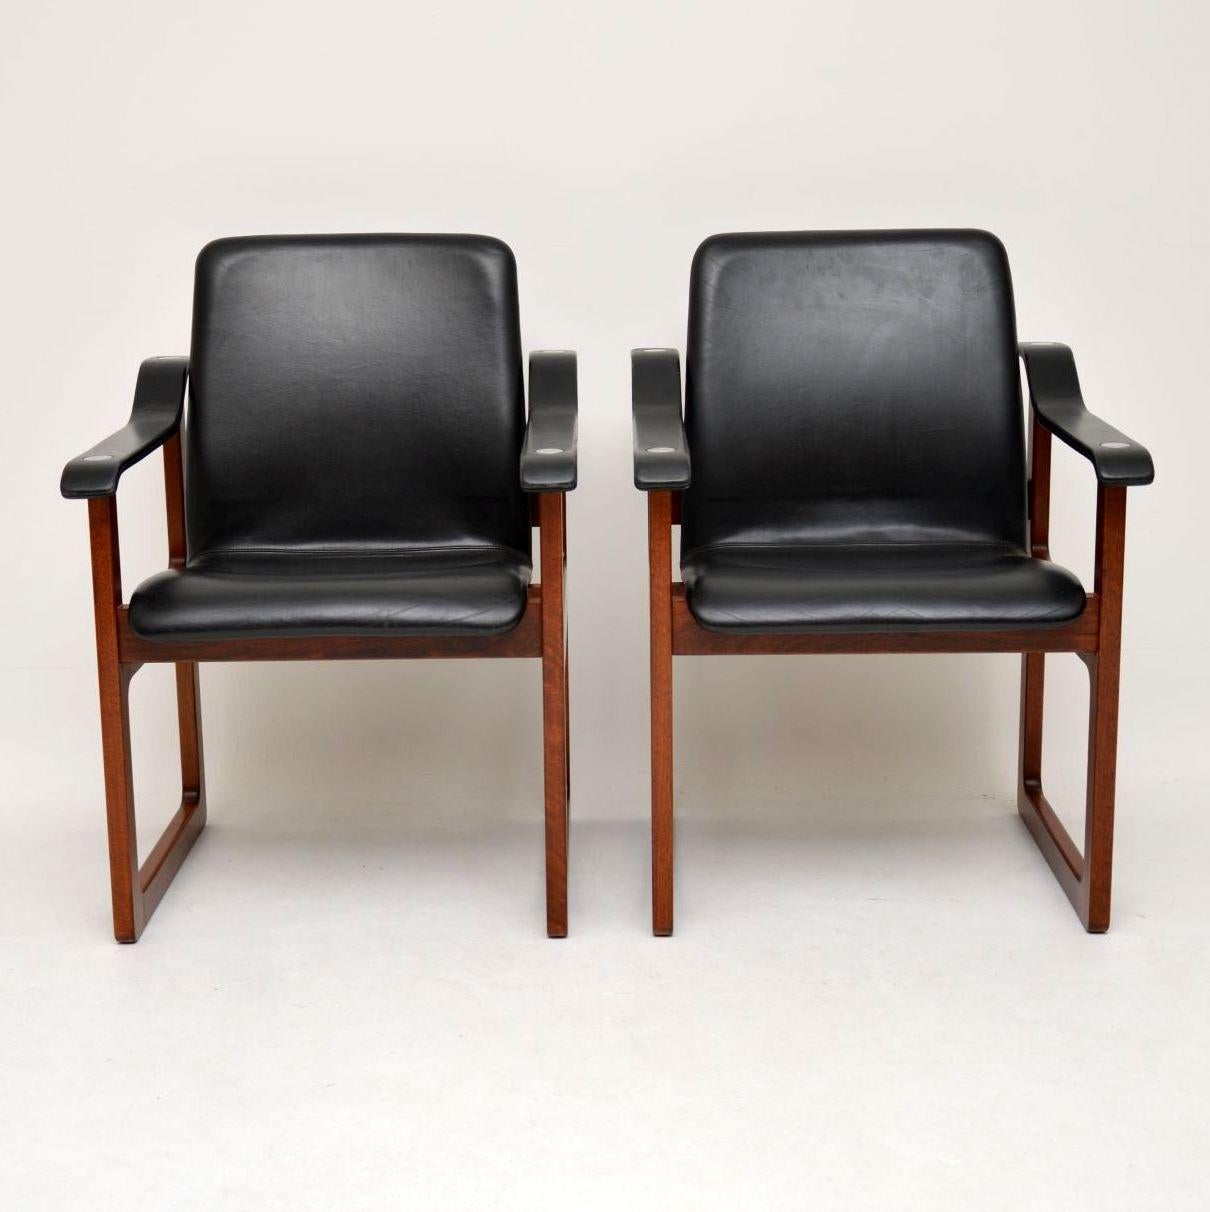 An absolutely stunning and very rare pair of vintage Danish armchairs in solid wood with black leather upholstery and chrome embellishments on the upper arms. These were made by Dyrlund, circa 1970s, we have never come across this model before.